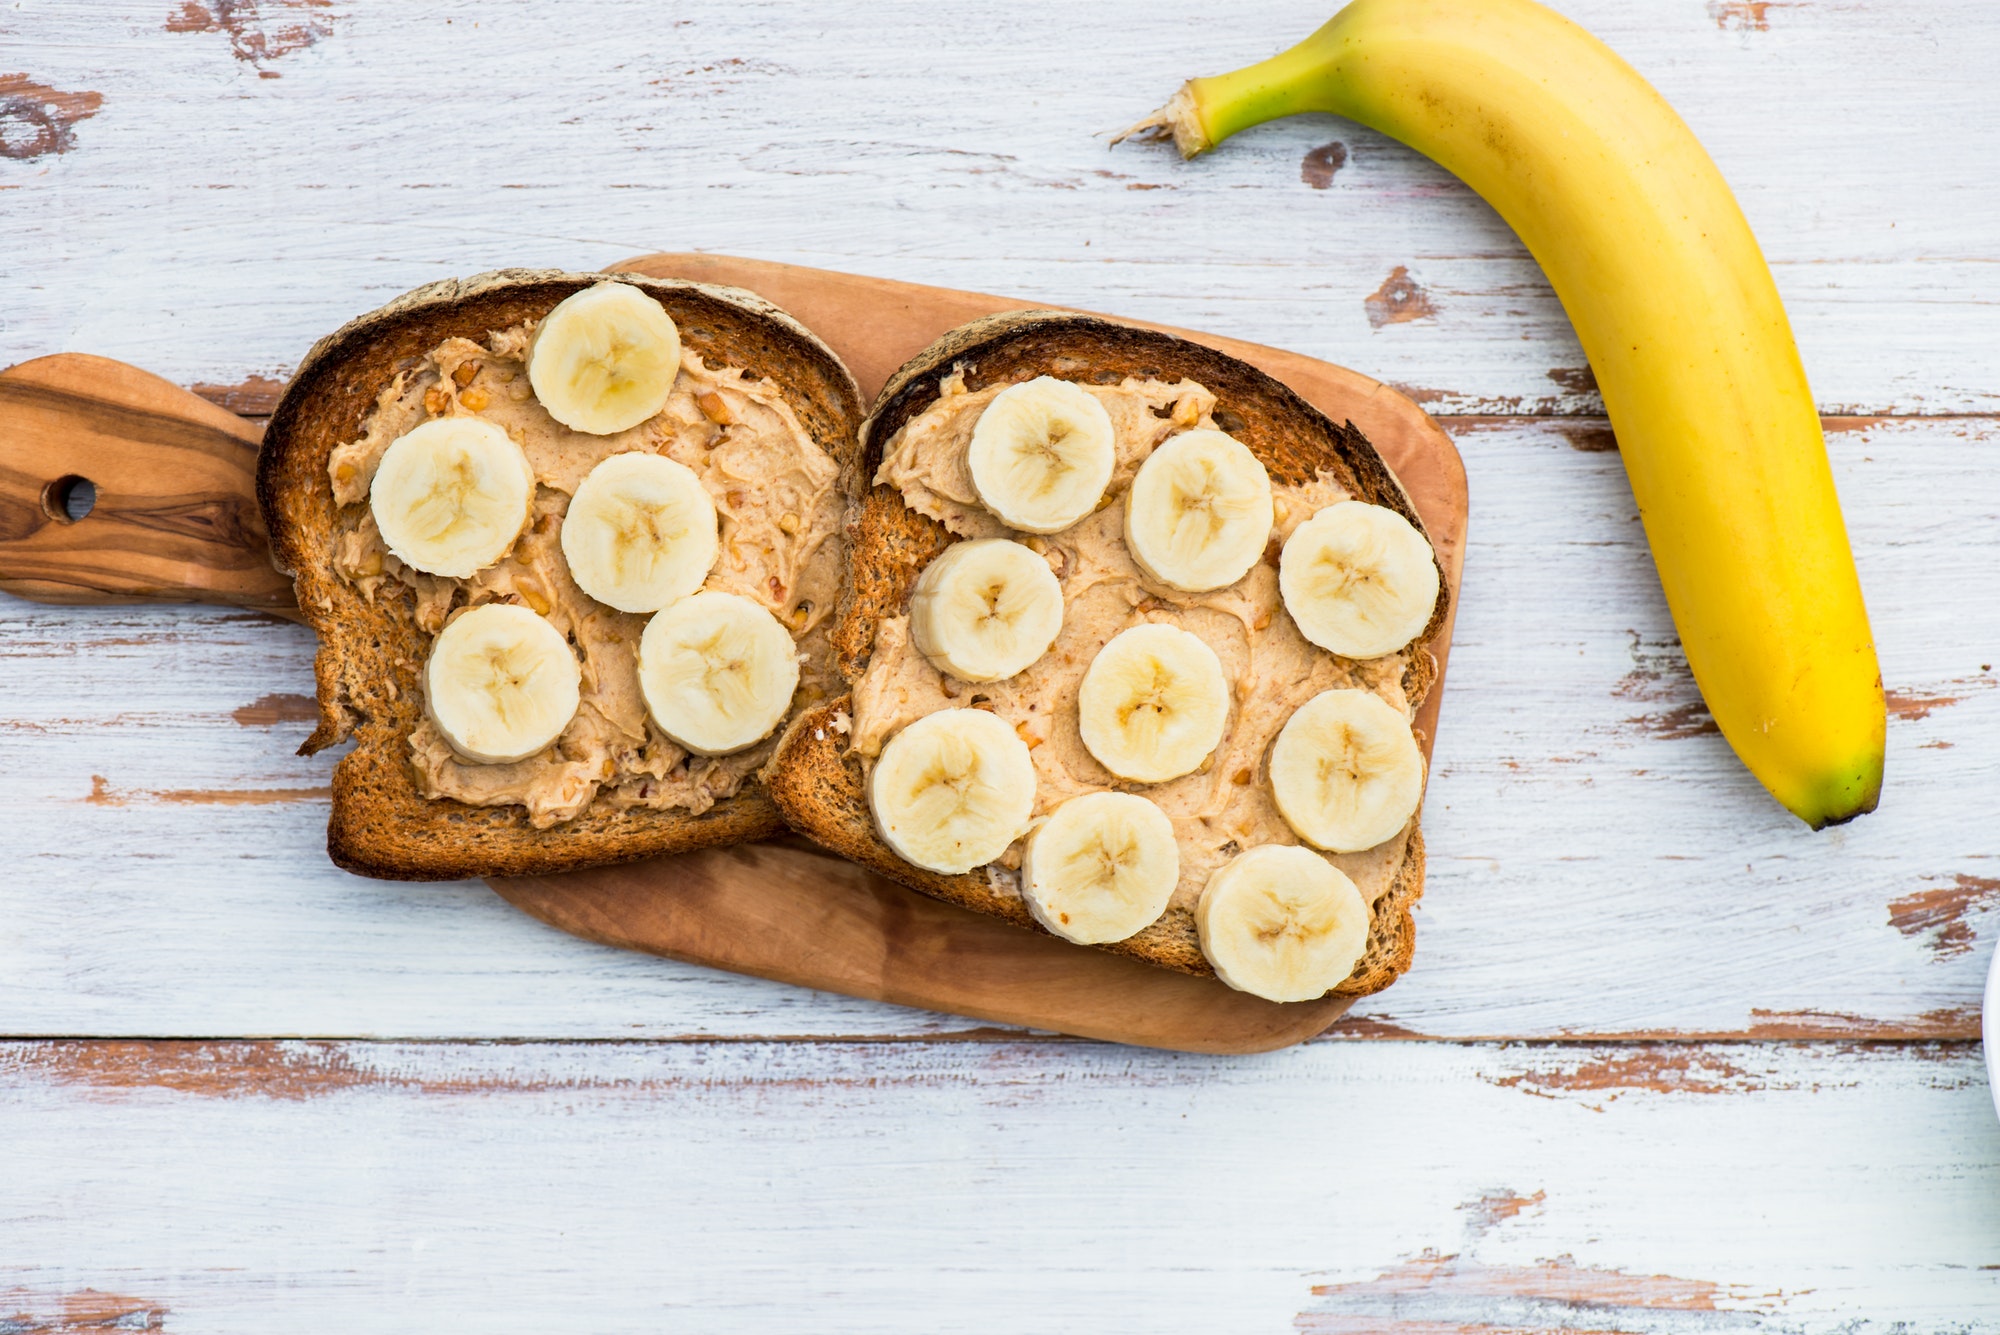 Toasts from Wholewheat Bread with Peanut Butter and Banana